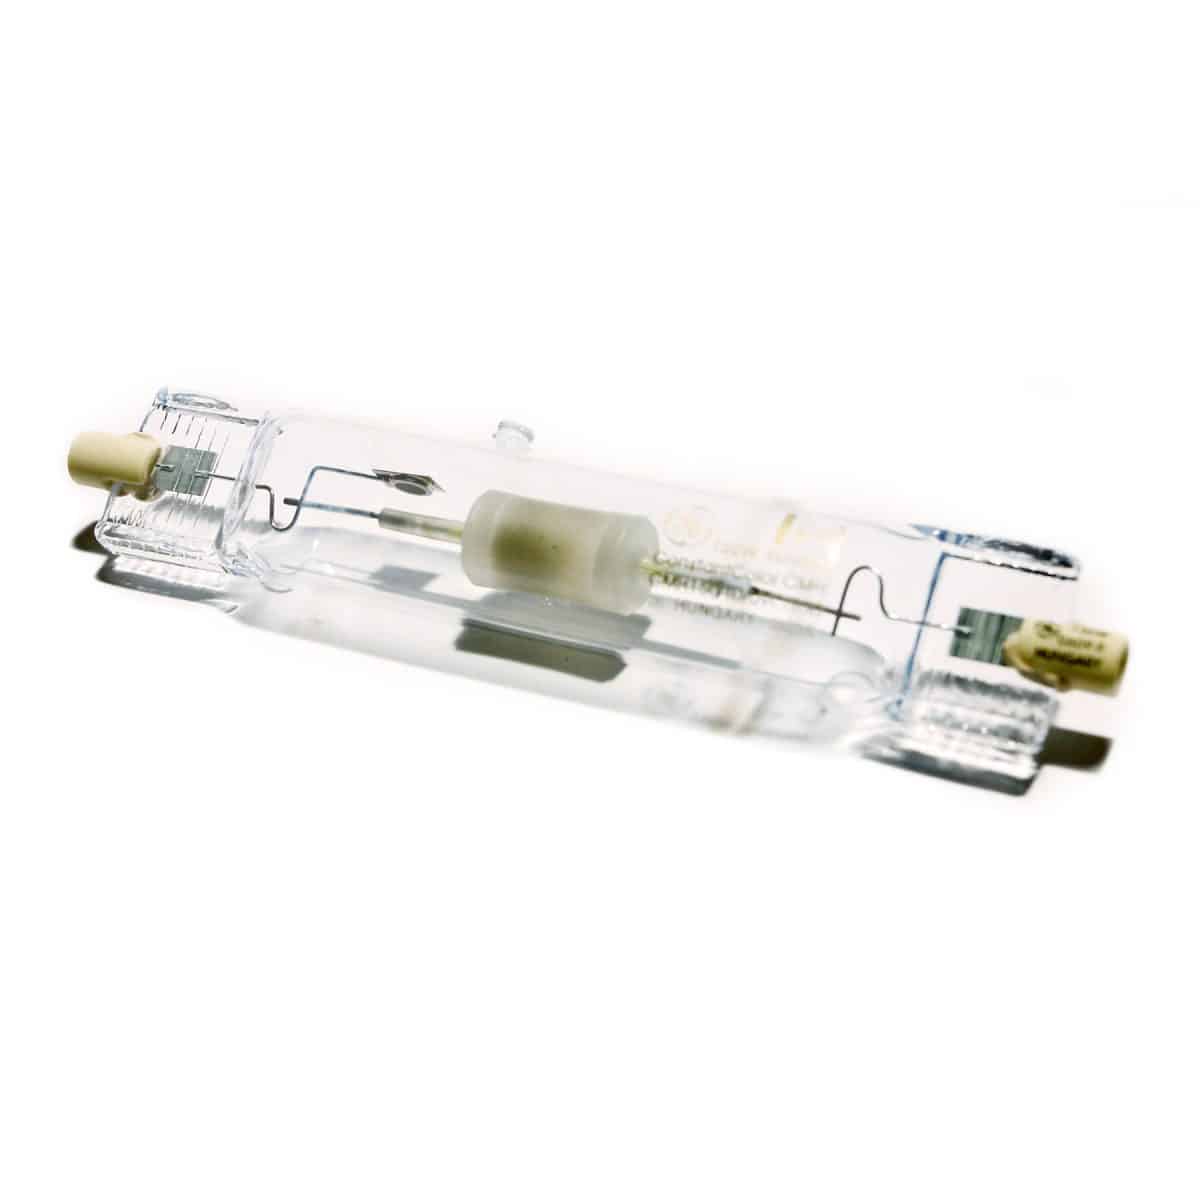 150watt High Intensity Discharge Lamp RX7s CMH-TD Double Ended Colour 830 Warm White